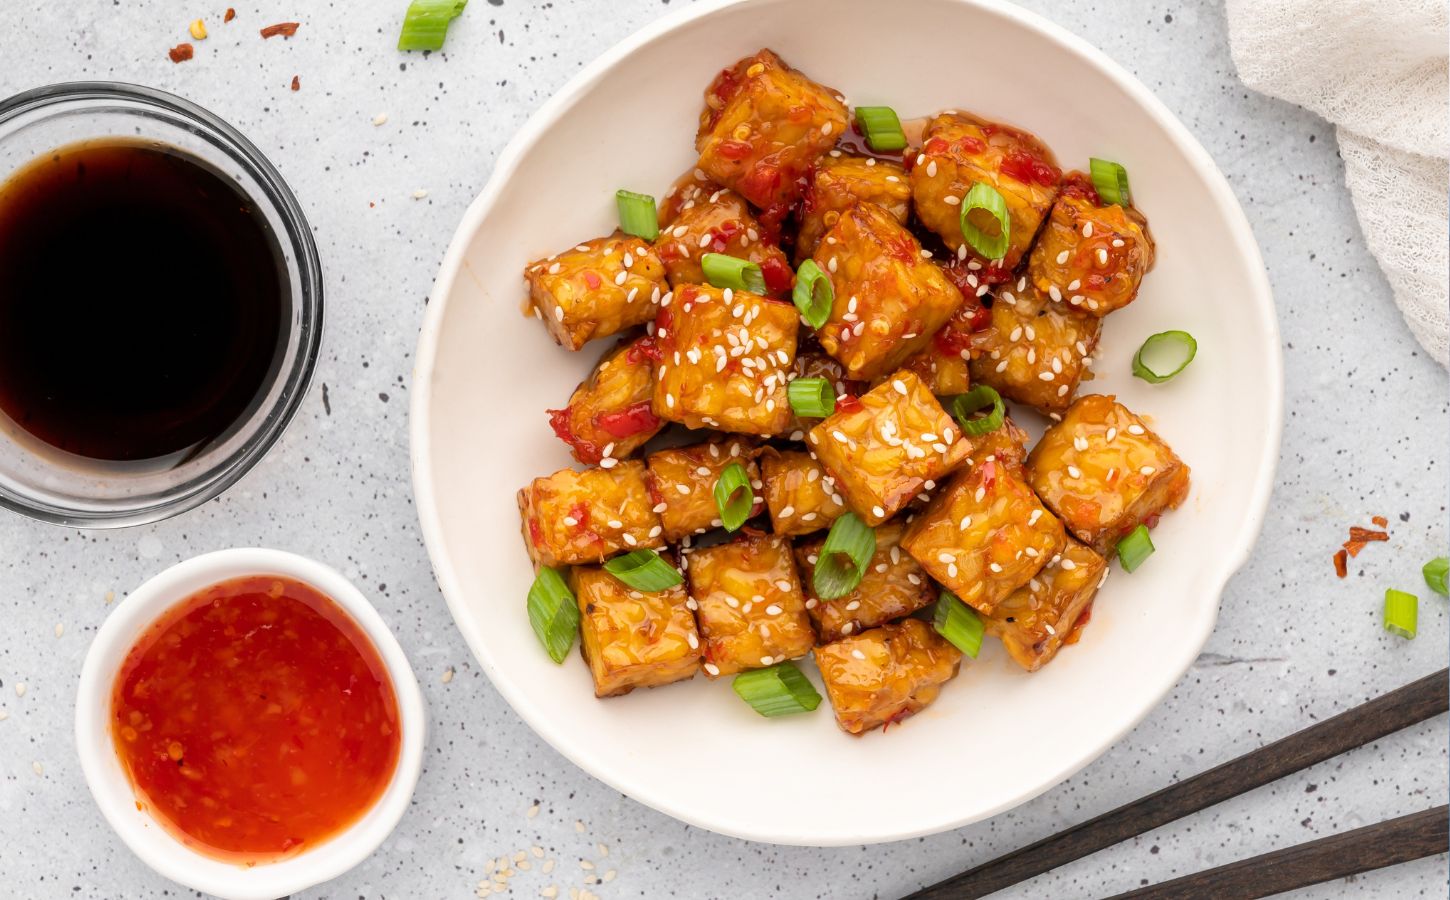 An easy sweet chili tempeh recipe made in an air fryer